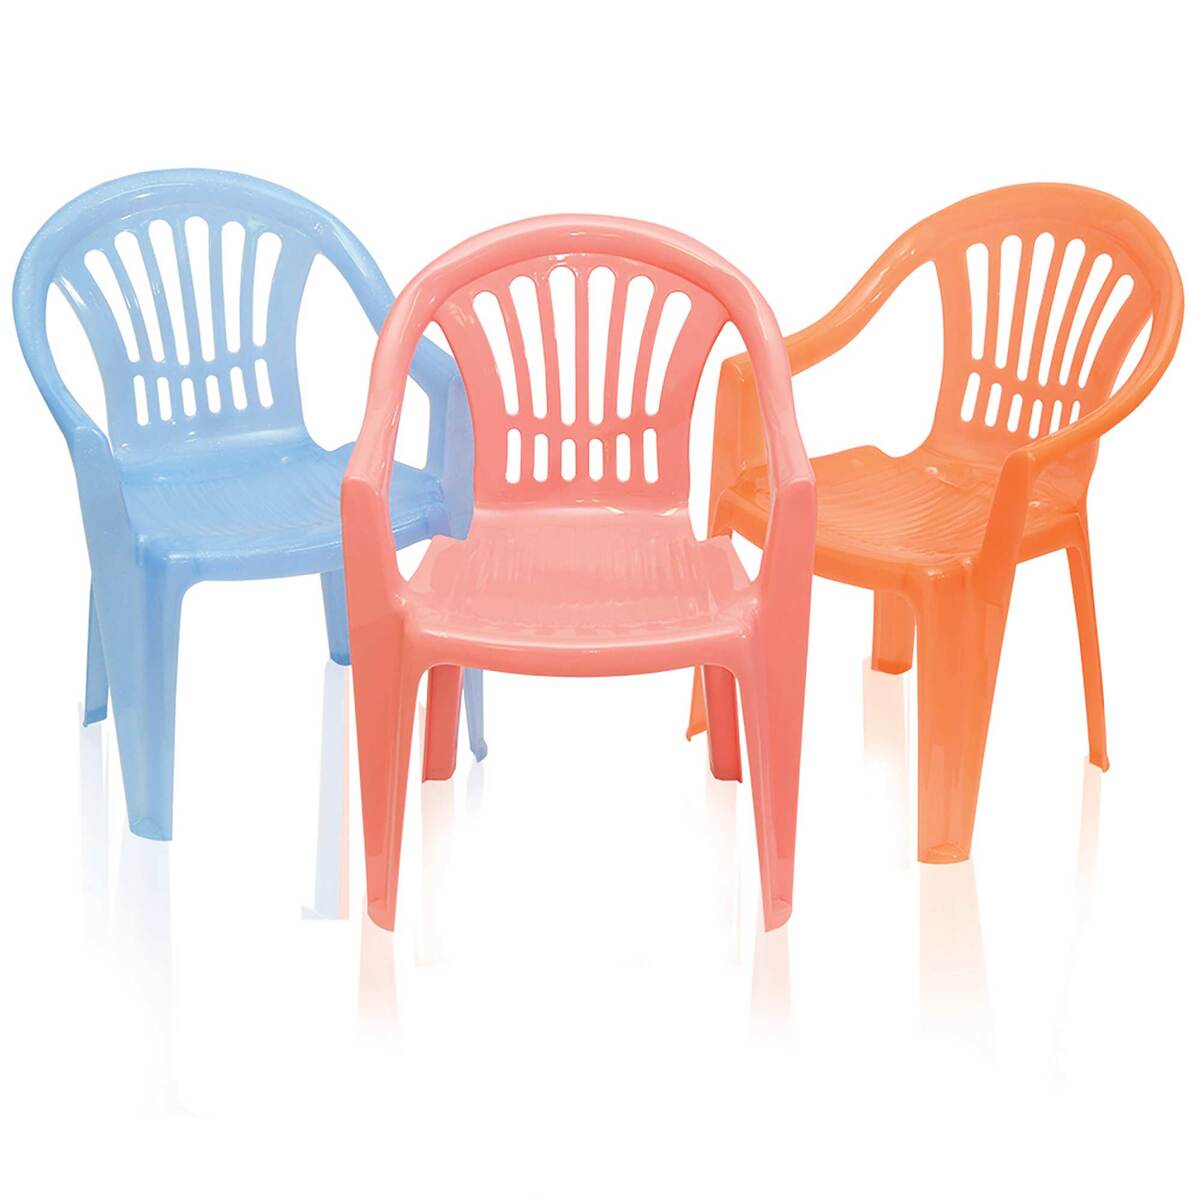 Home Needs Kids chair Assorted